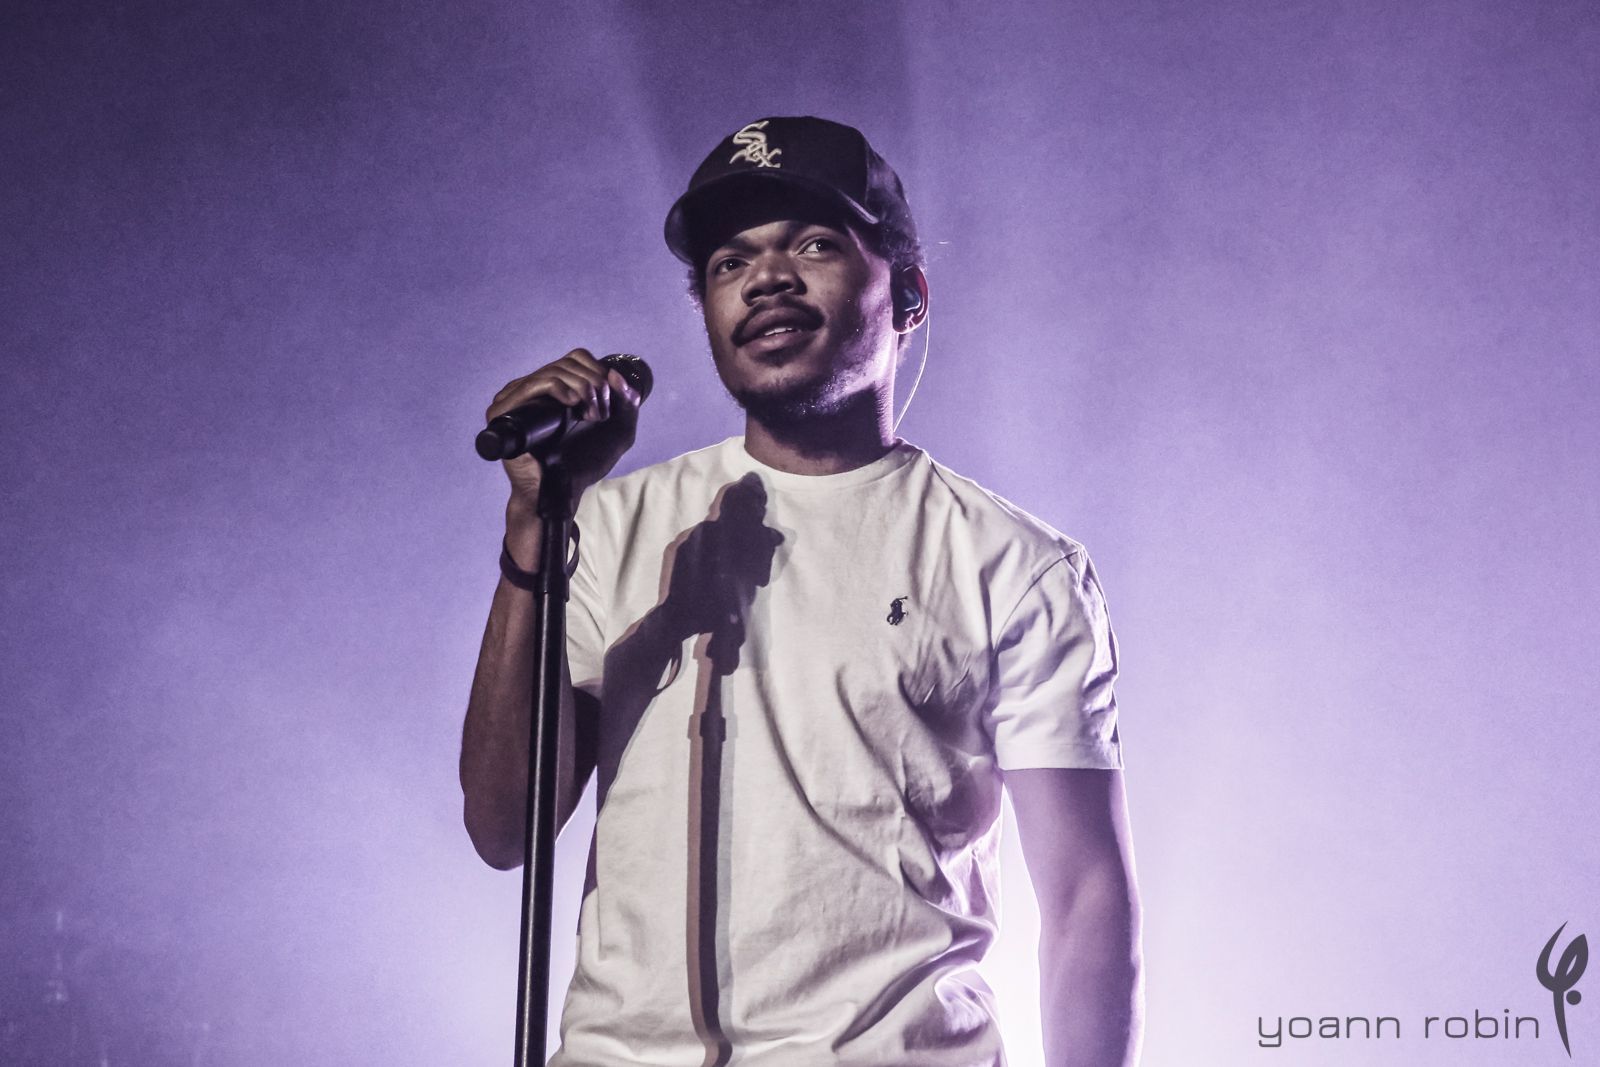 Chance the Rapper performs at the 2017 Lollapalooza festival in Chicago. - Chance the Rapper